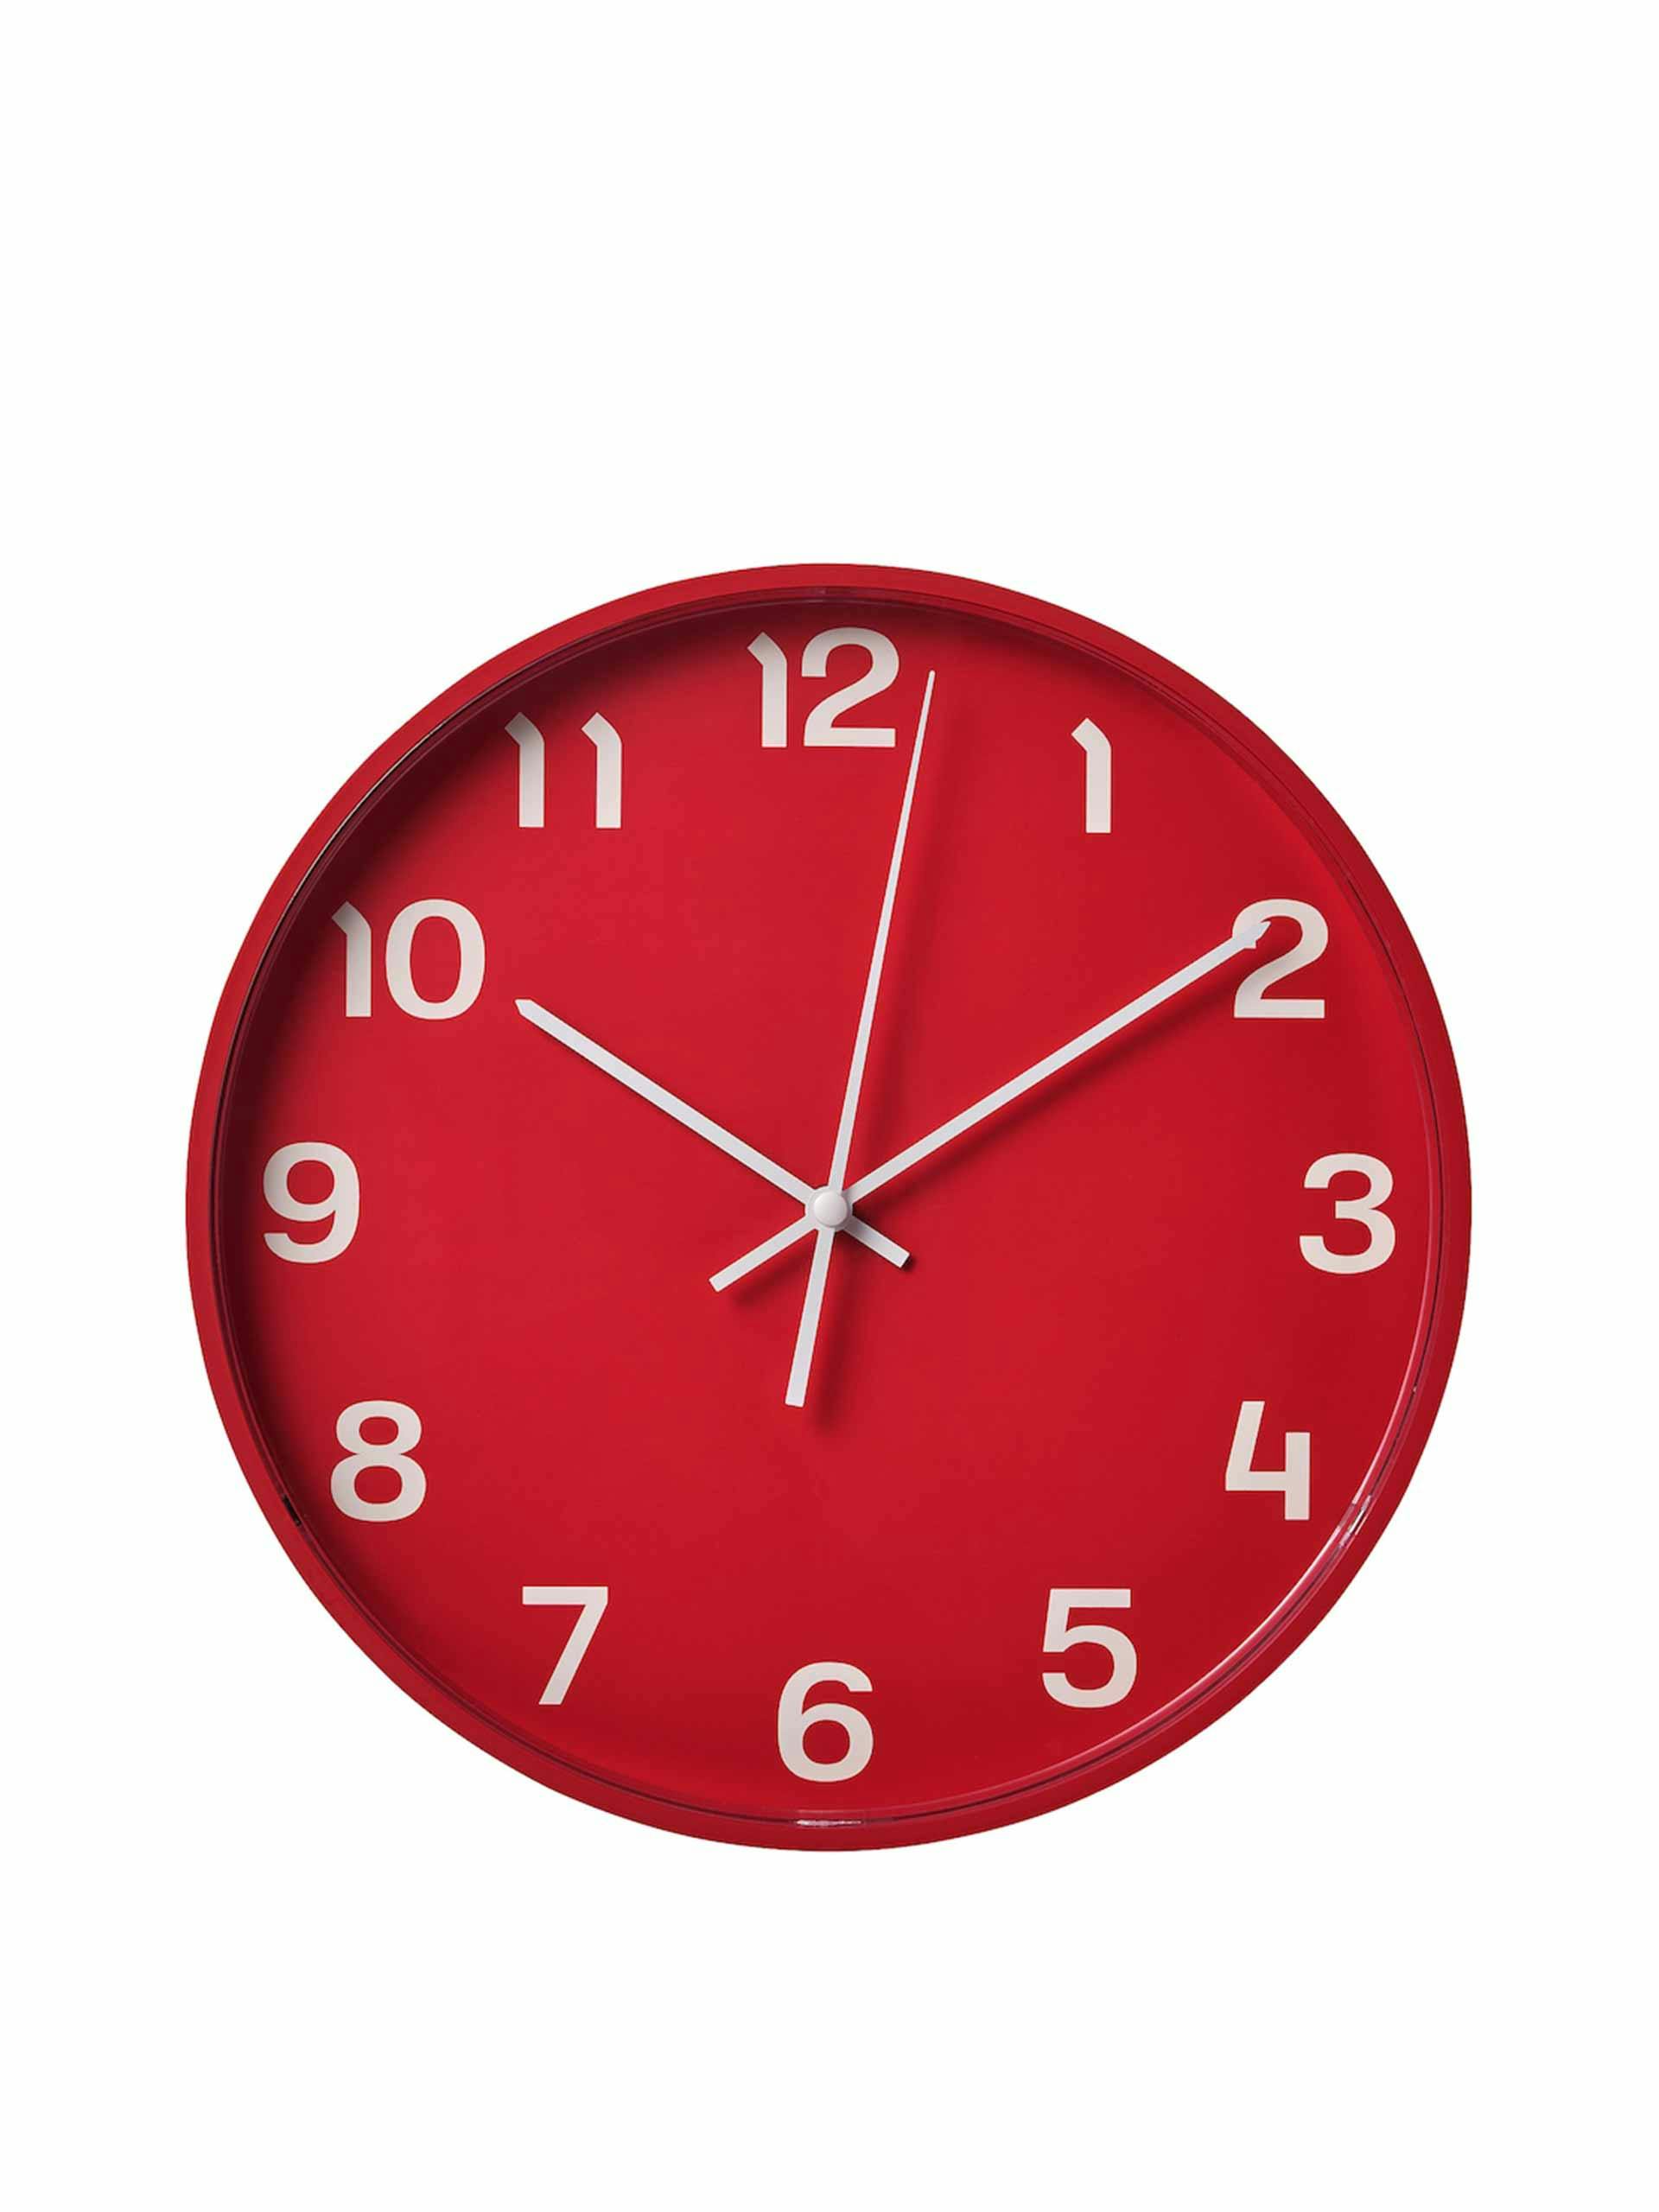 Statement red wall clock